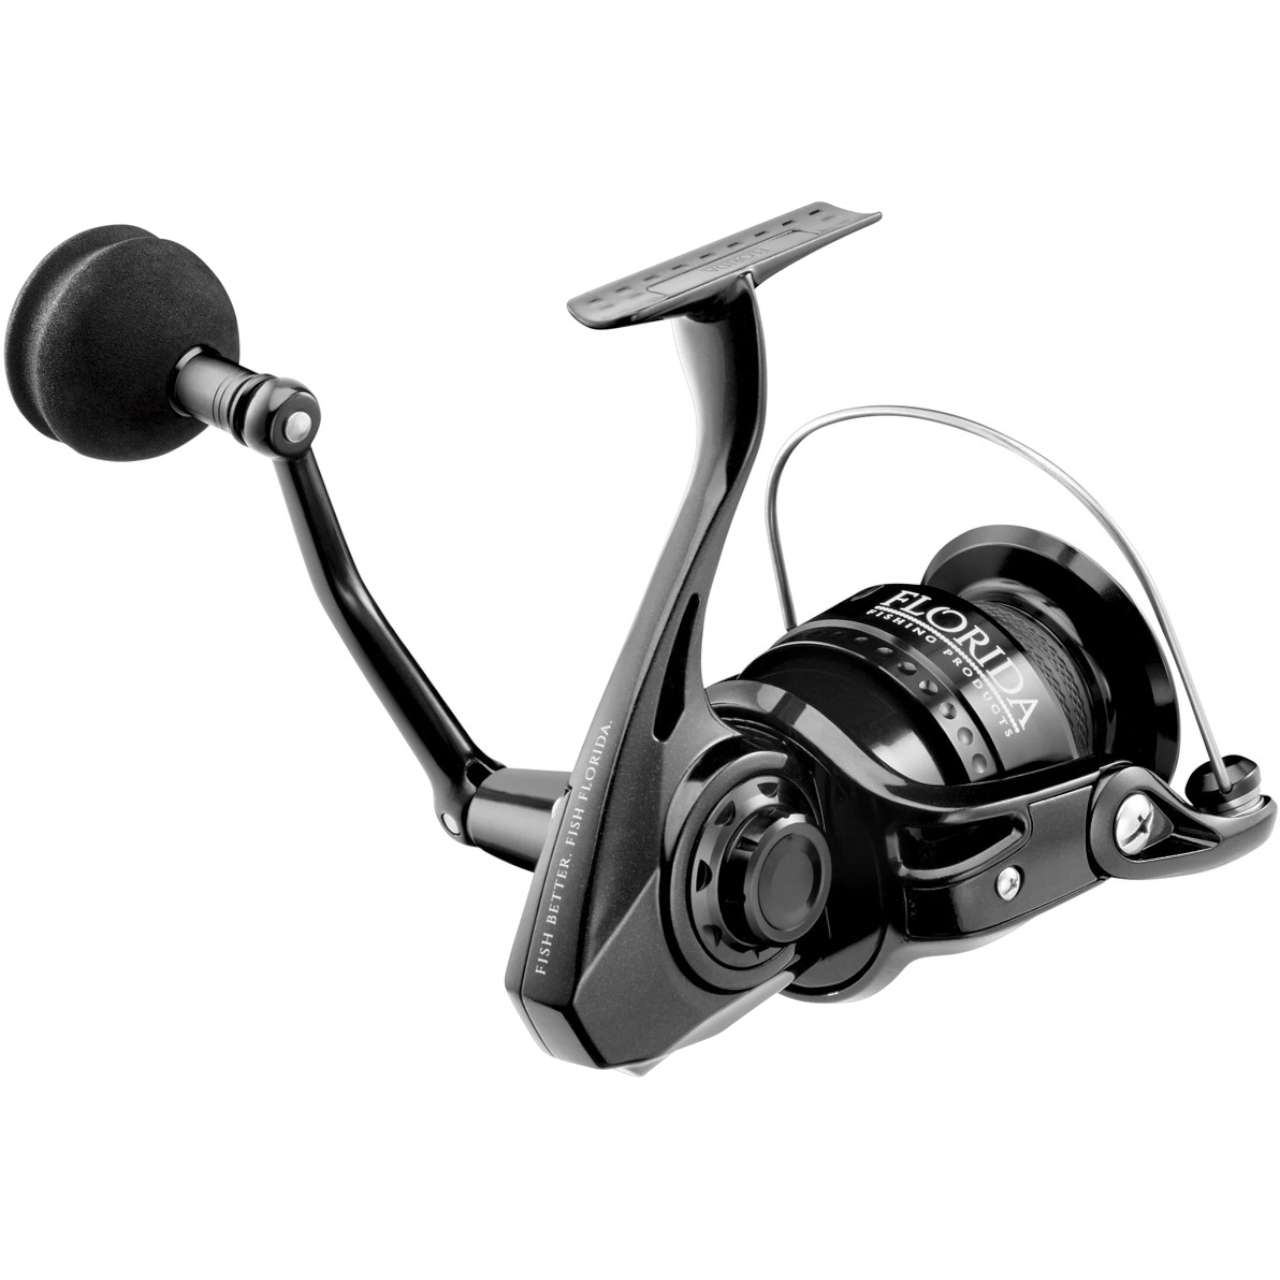 Florida Fishing Products Resolute Spinning Reel 8000 - TackleDirect